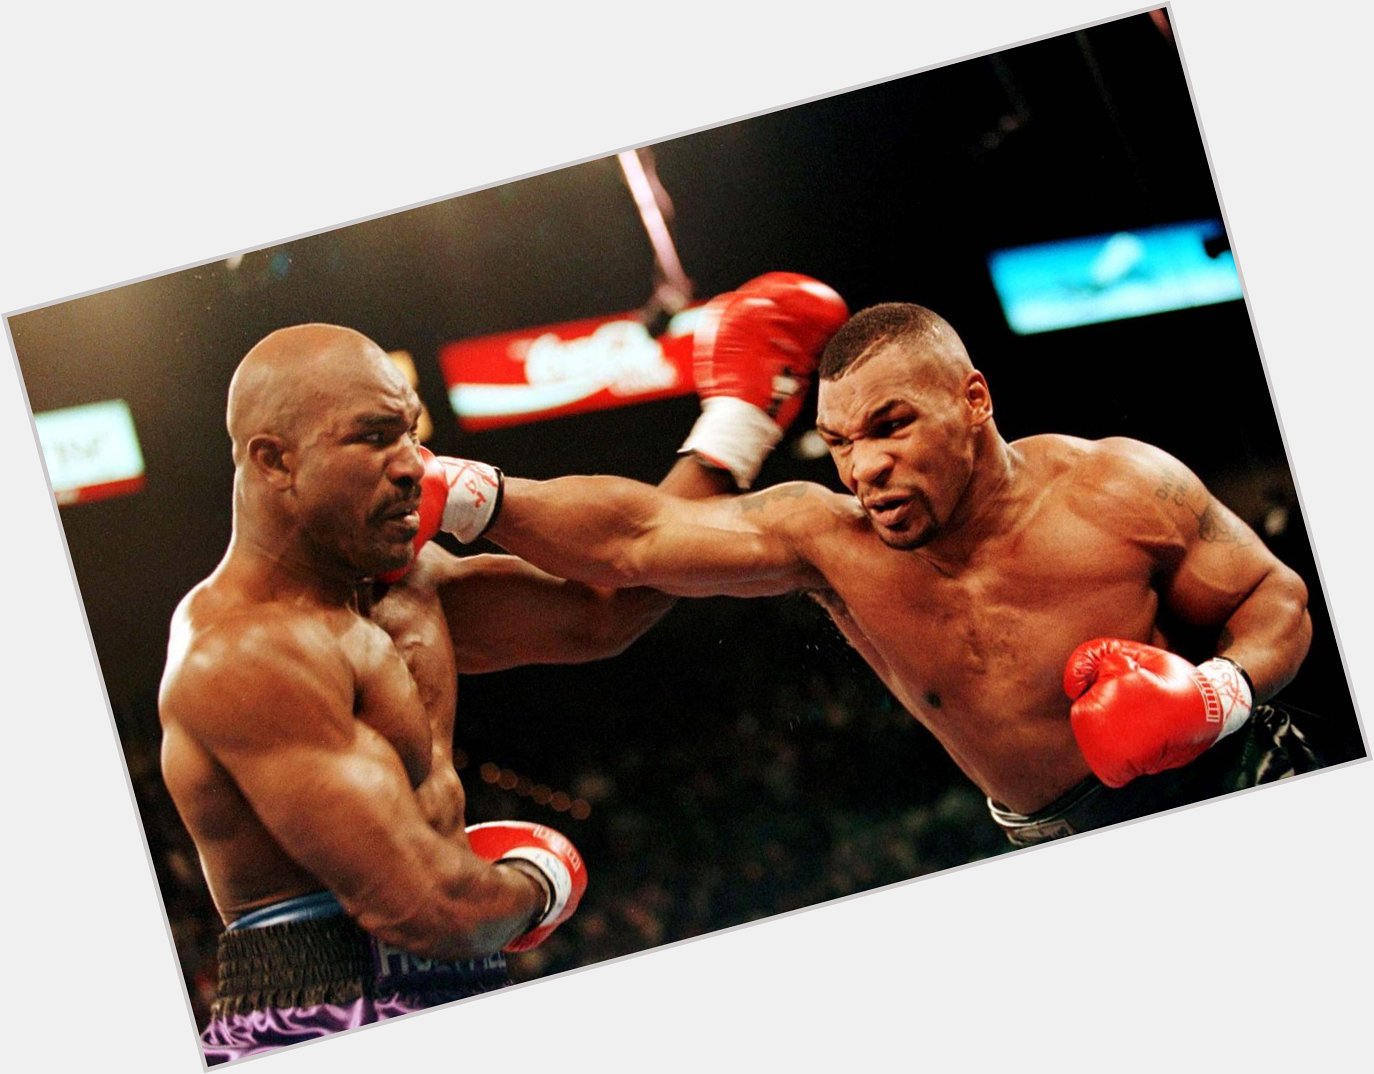 Happy Birthday to Mike Tyson, who turns 49 today! 